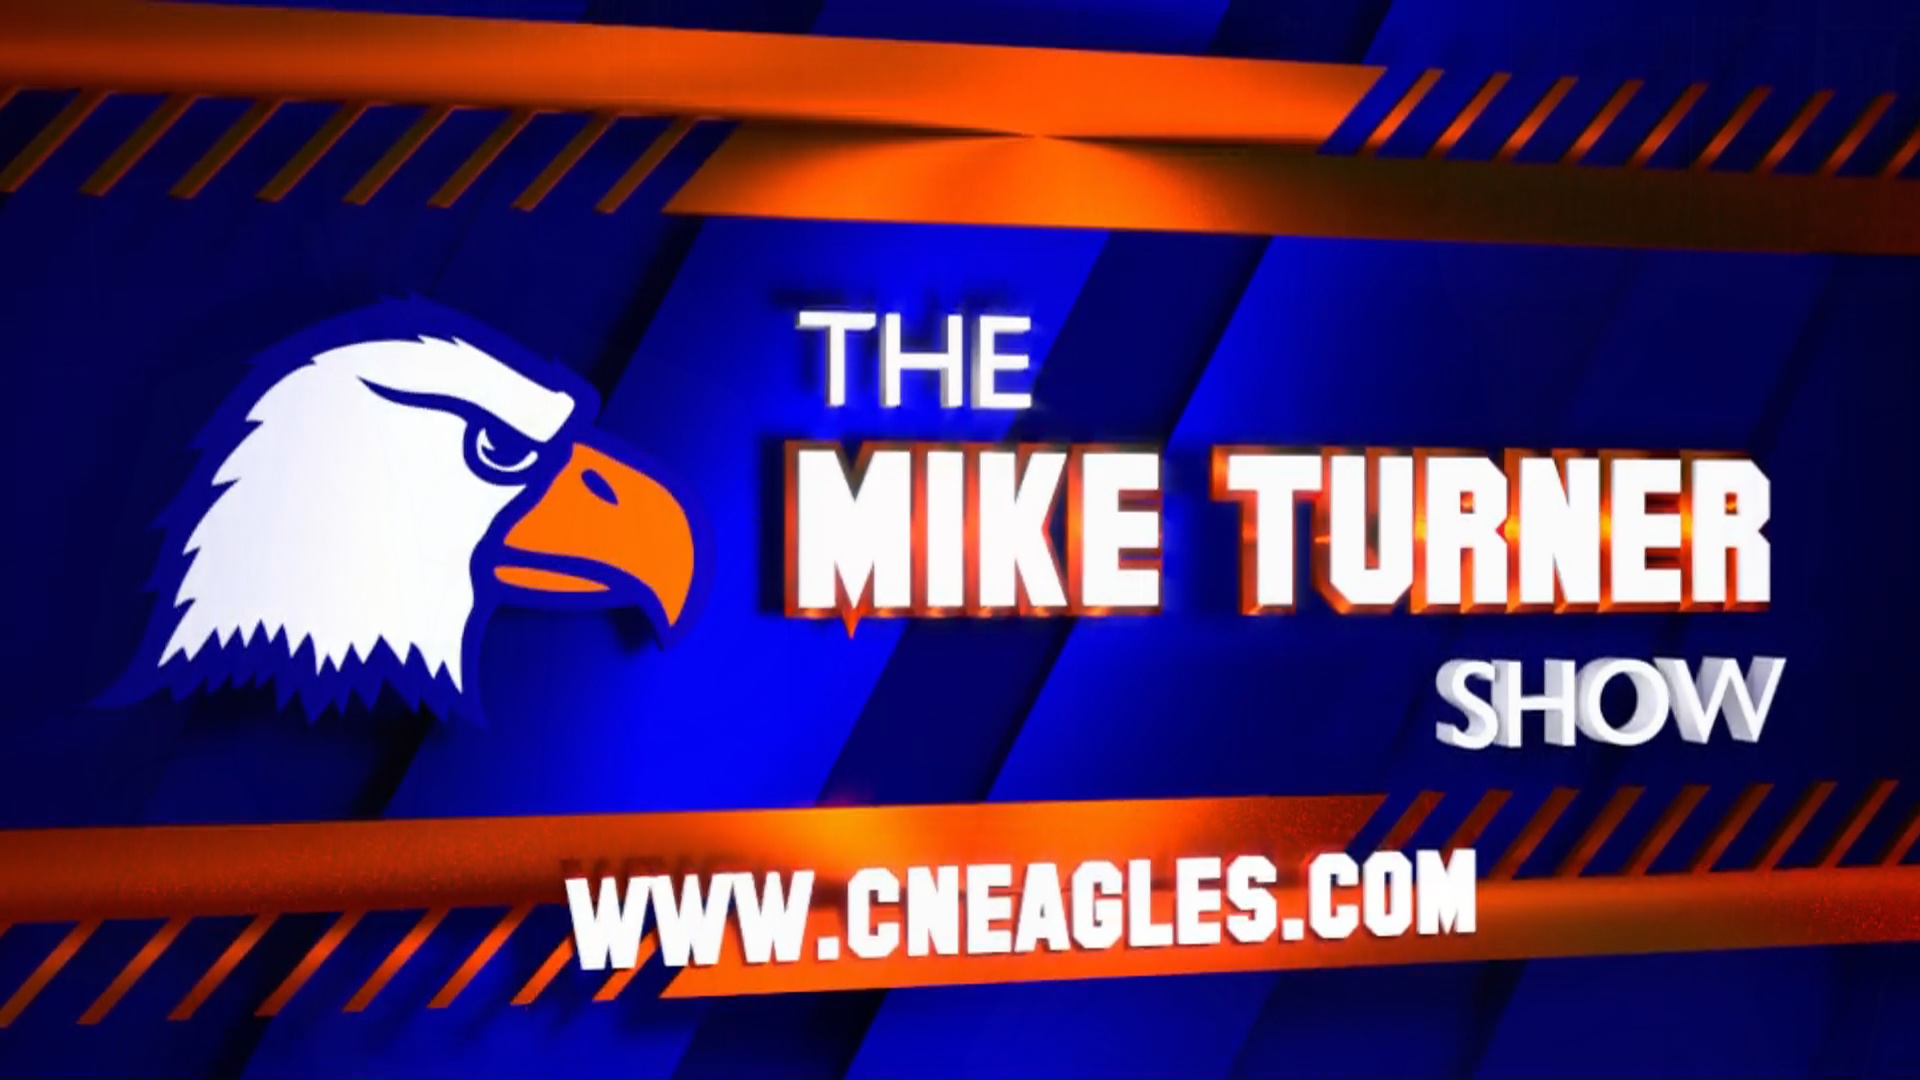 Week two of the Mike Turner Show available online